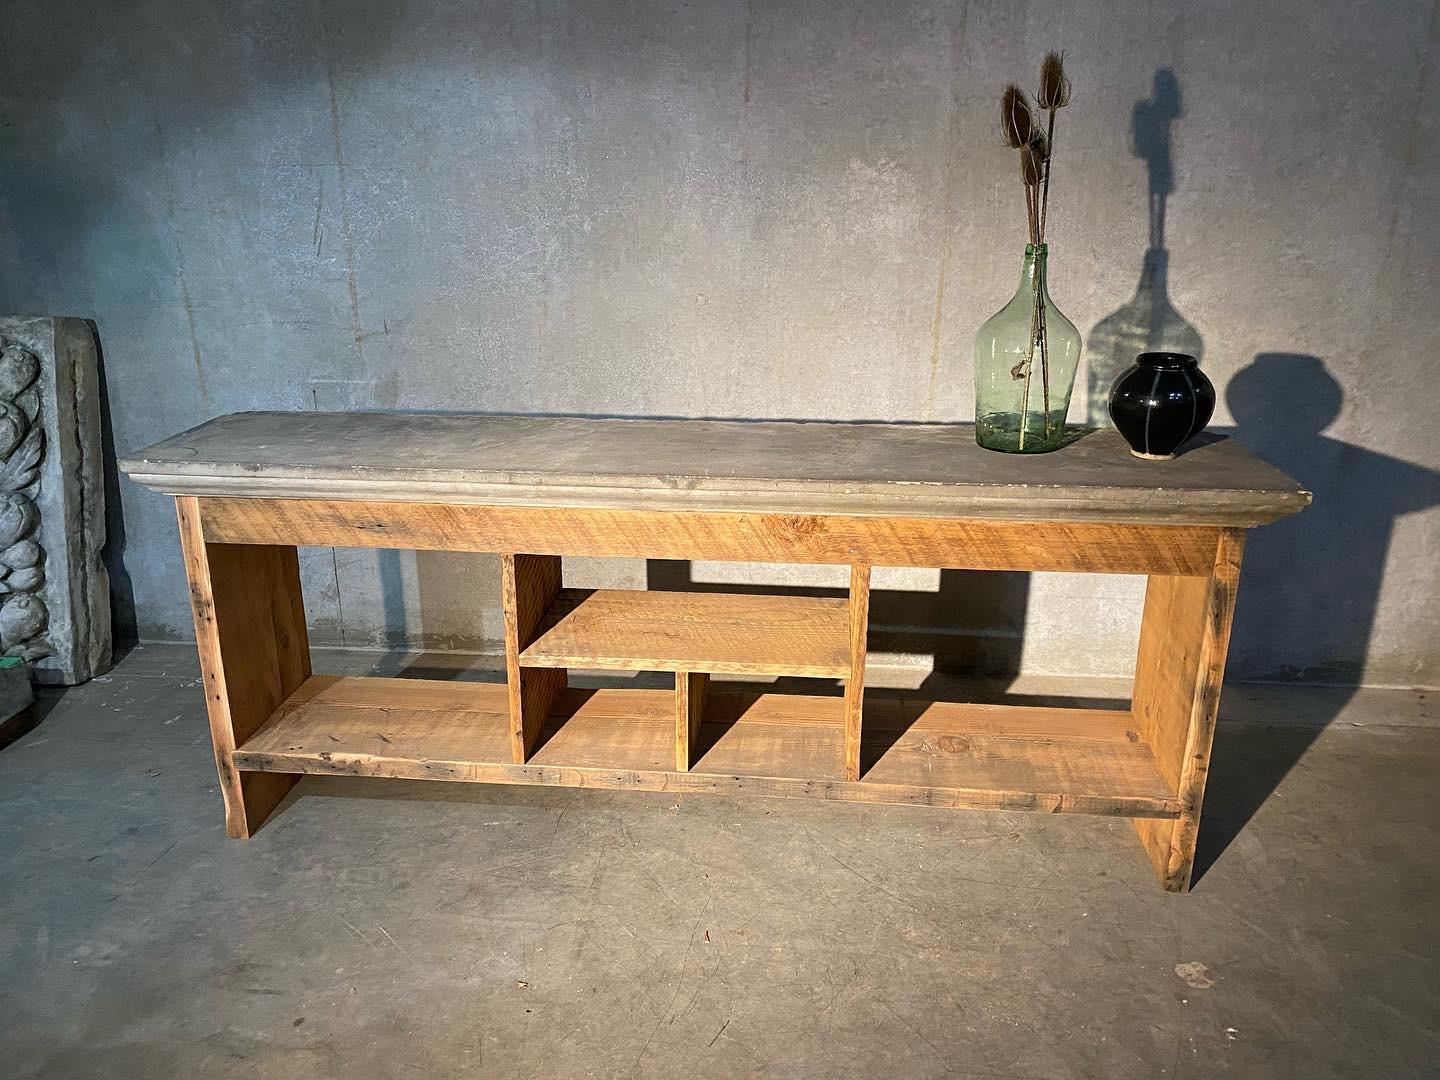 20th Century Bespoke Console/ Sofa Table in Reclaimed Wood with Limestone Top